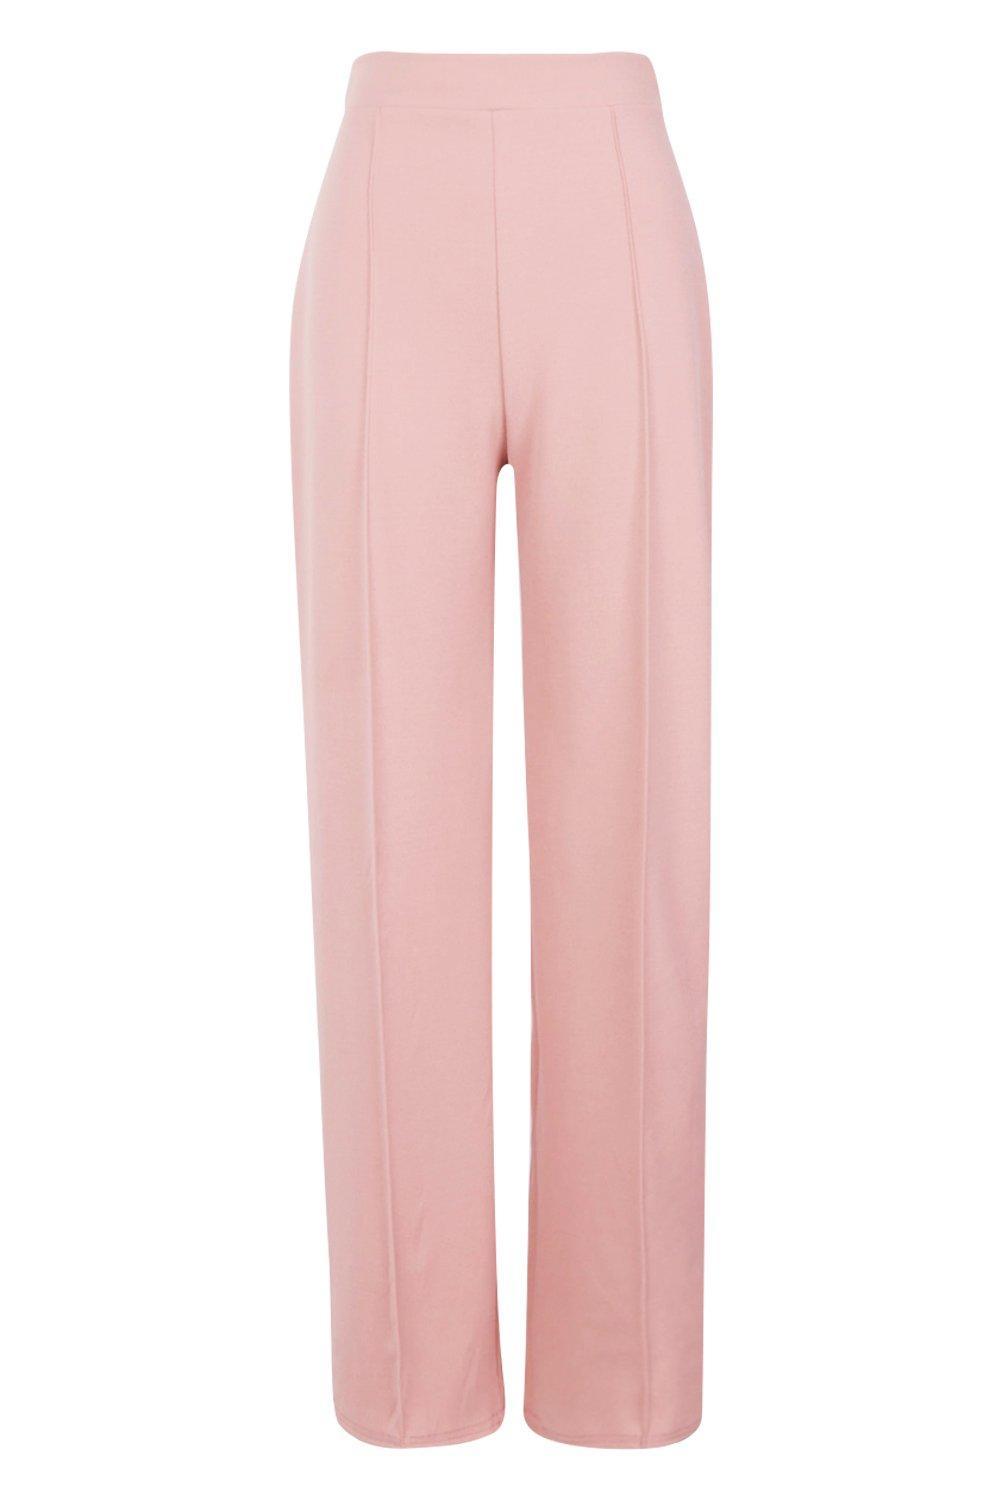 Lyst - Boohoo High Waisted Seam Front Wide Leg Trousers in Pink